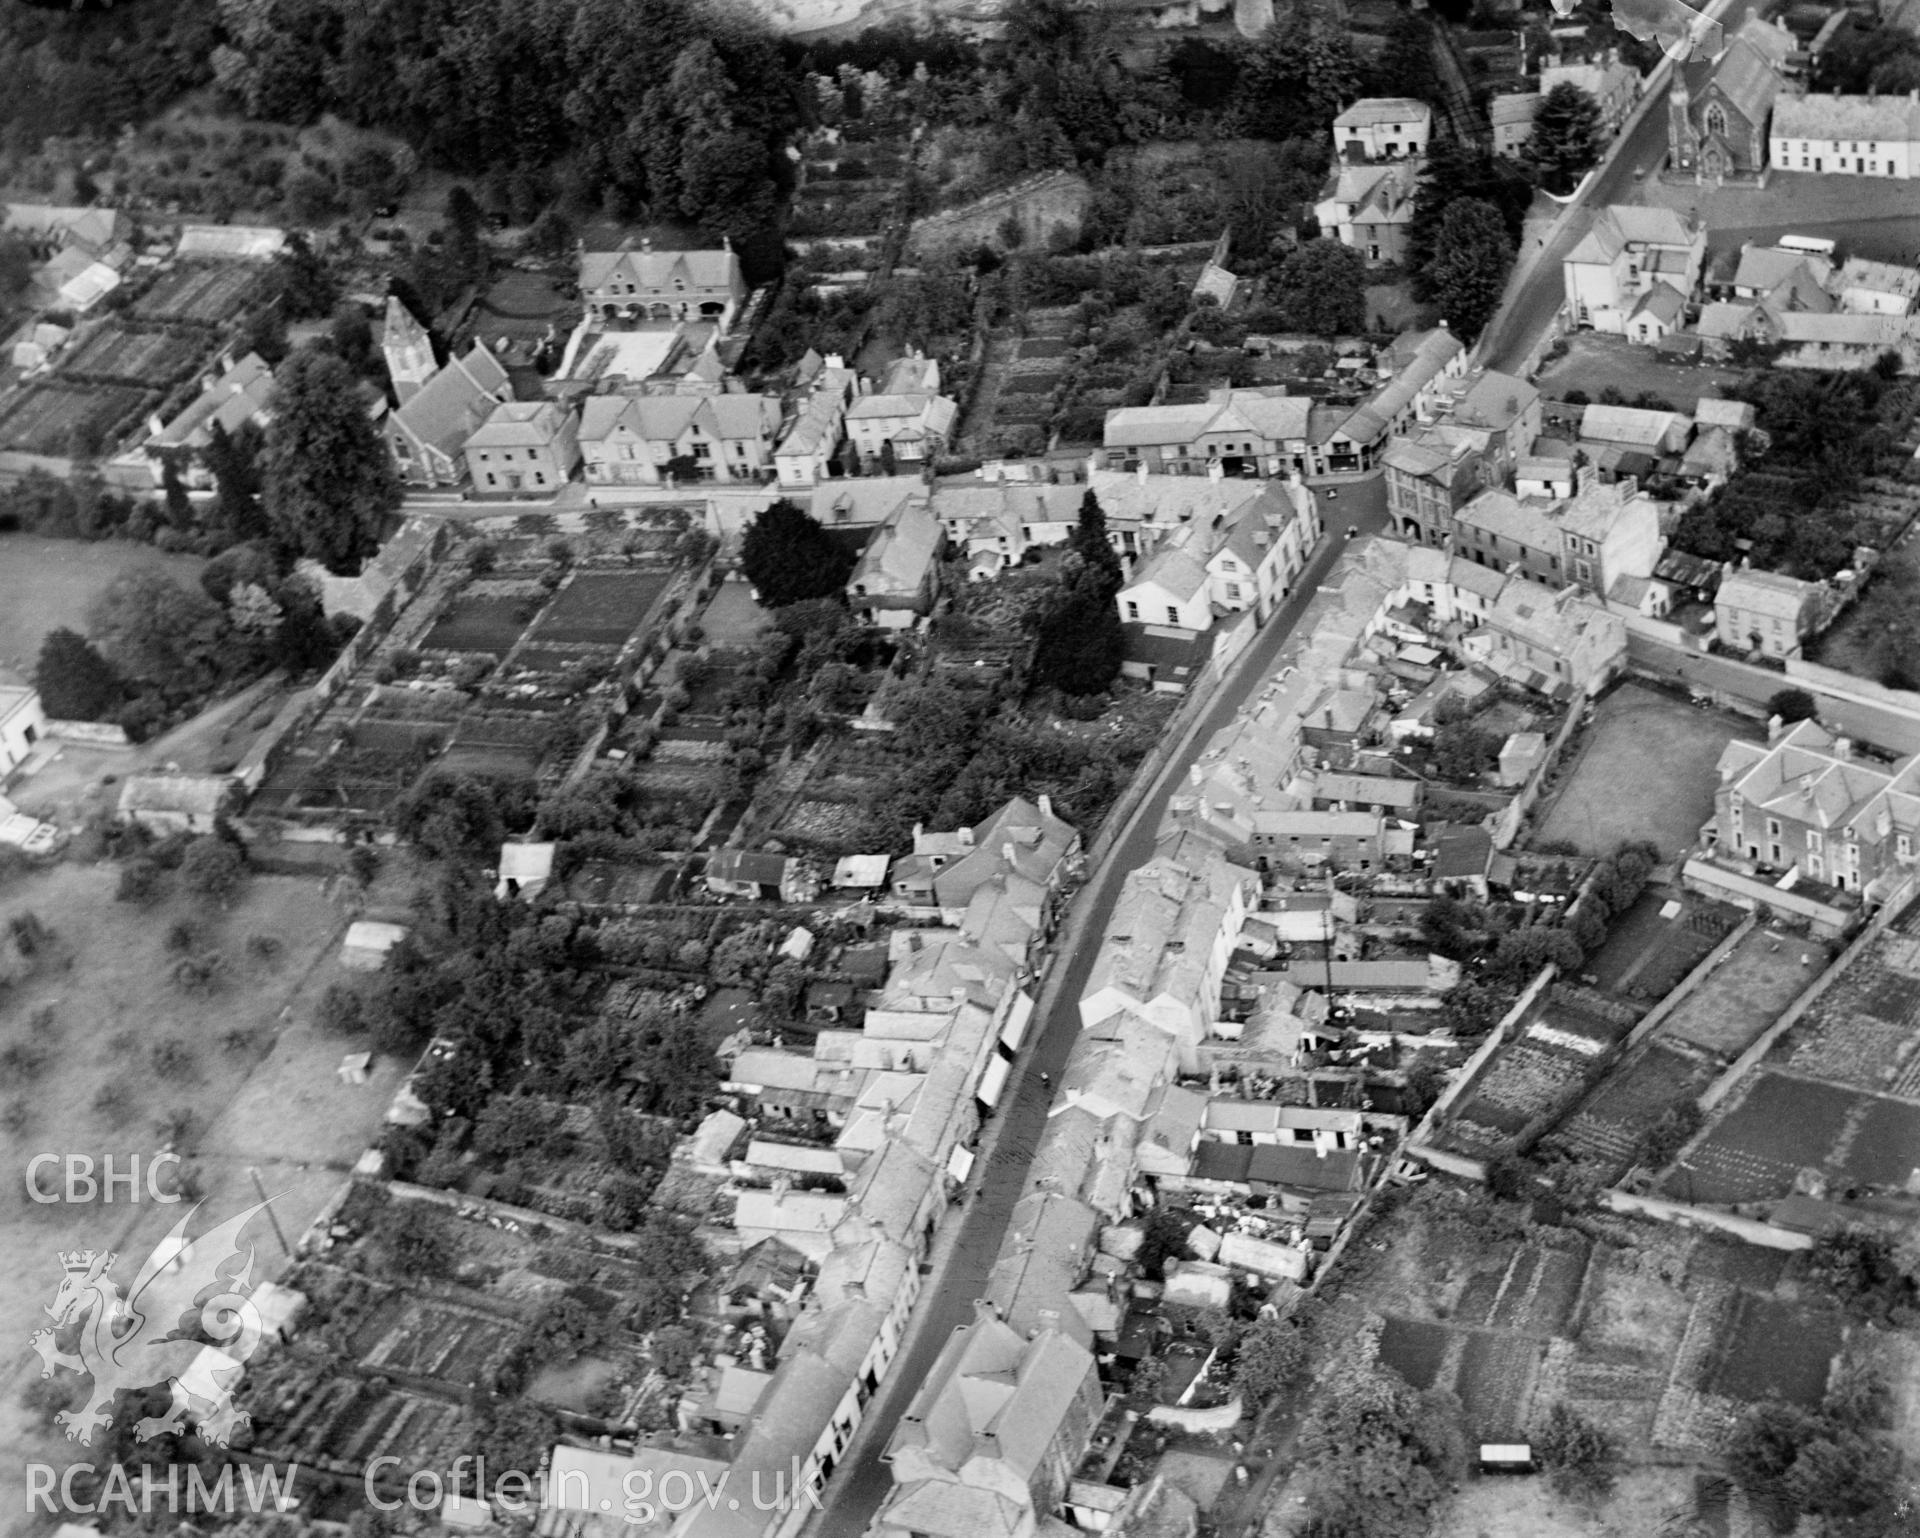 View of Usk looking up Bridge and Porthycarne streets. Oblique aerial photograph, 5?x4? BW glass plate.